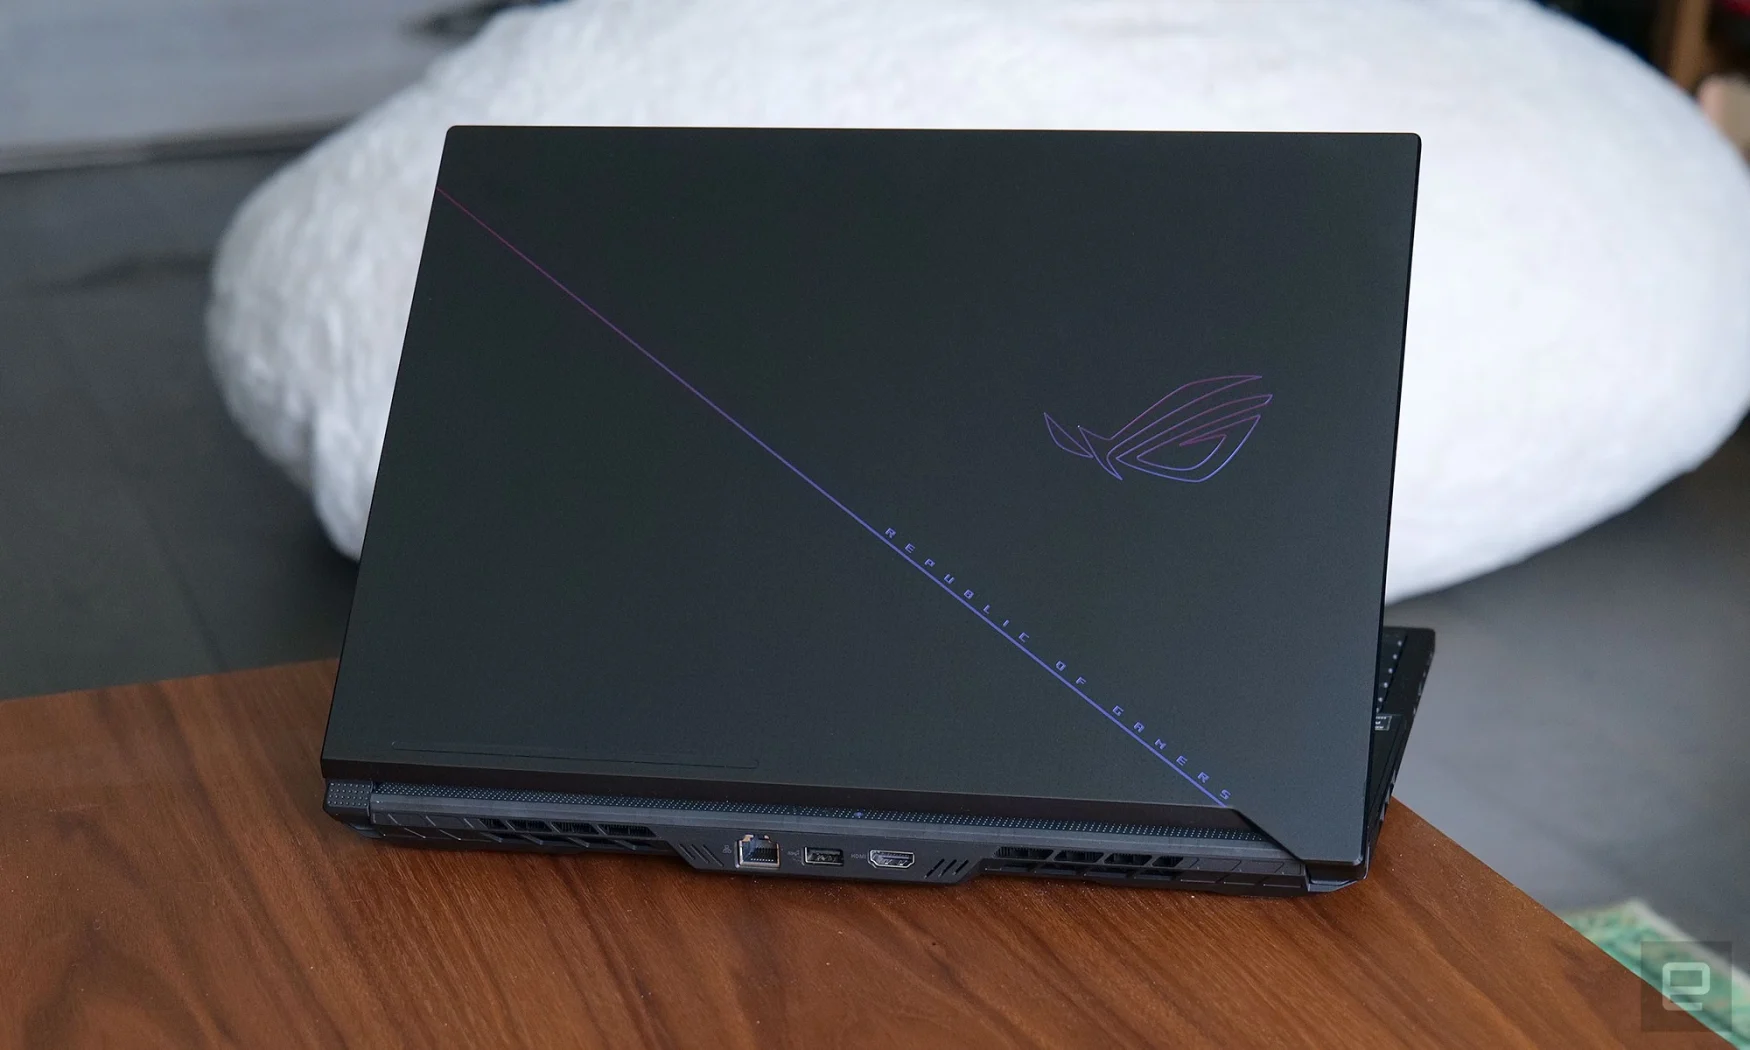 Unlike a lot of ROG laptops from ASUS, you don't get any RGB lighting on the outside, though the laptop still features relatively aggressive styling. 